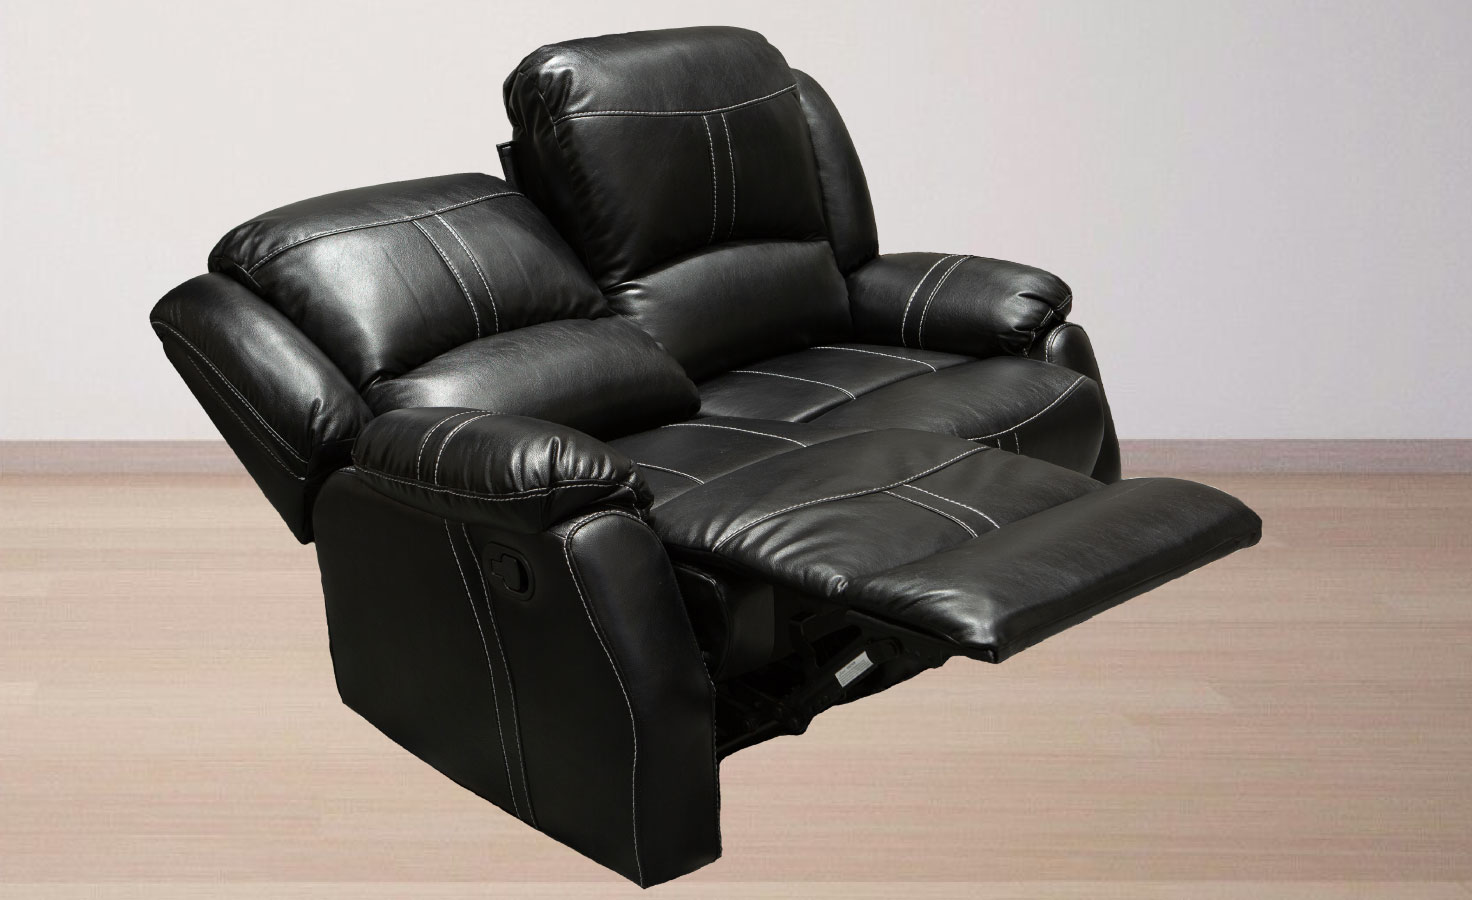 Lorraine BelAire Deluxe Ebony Reclining Loveseat Right Profile Recline by American Home Line